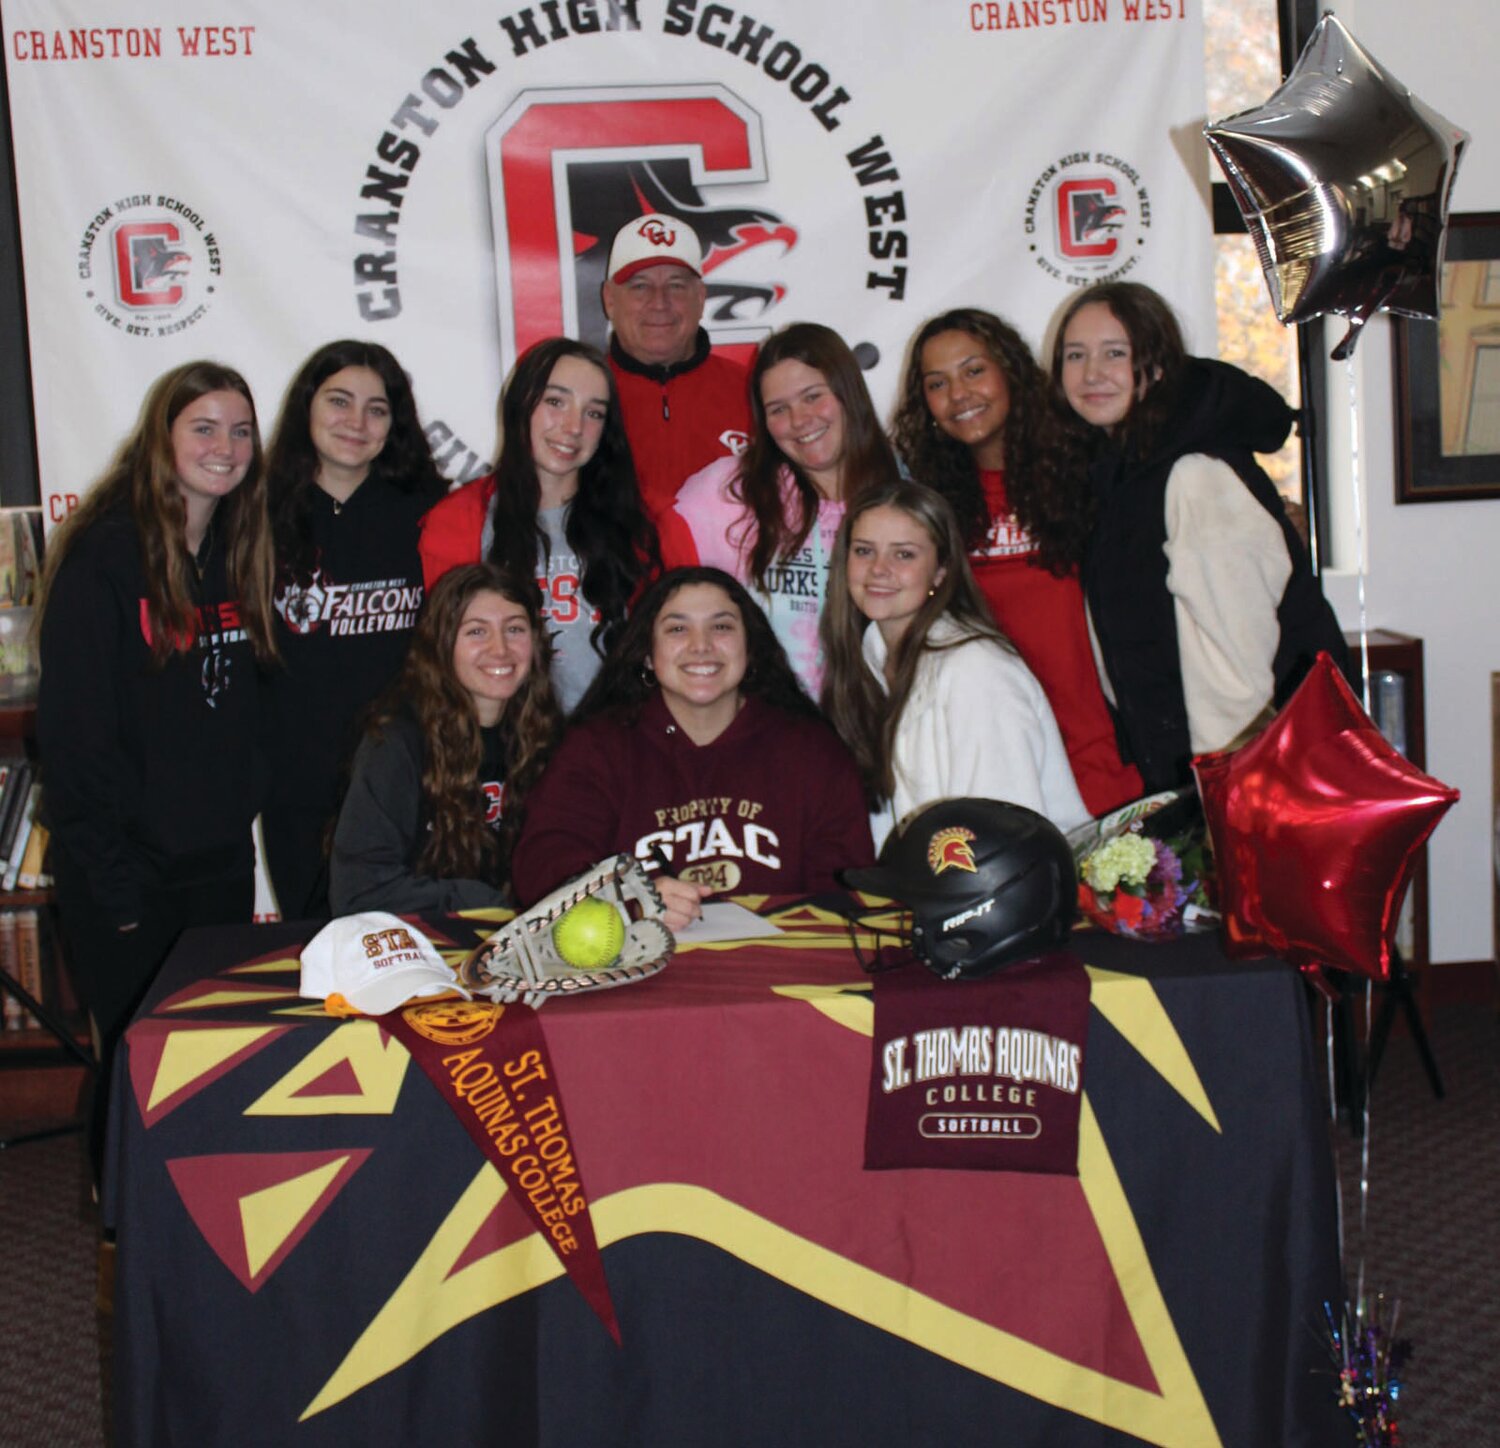 FALCONS FLY TOGETHER: Cranston West softball player Sofia Marella is joined by teammates as she signs her National Letter of Intent at a recent ceremony at the school. (Photos courtesy of CPSED)